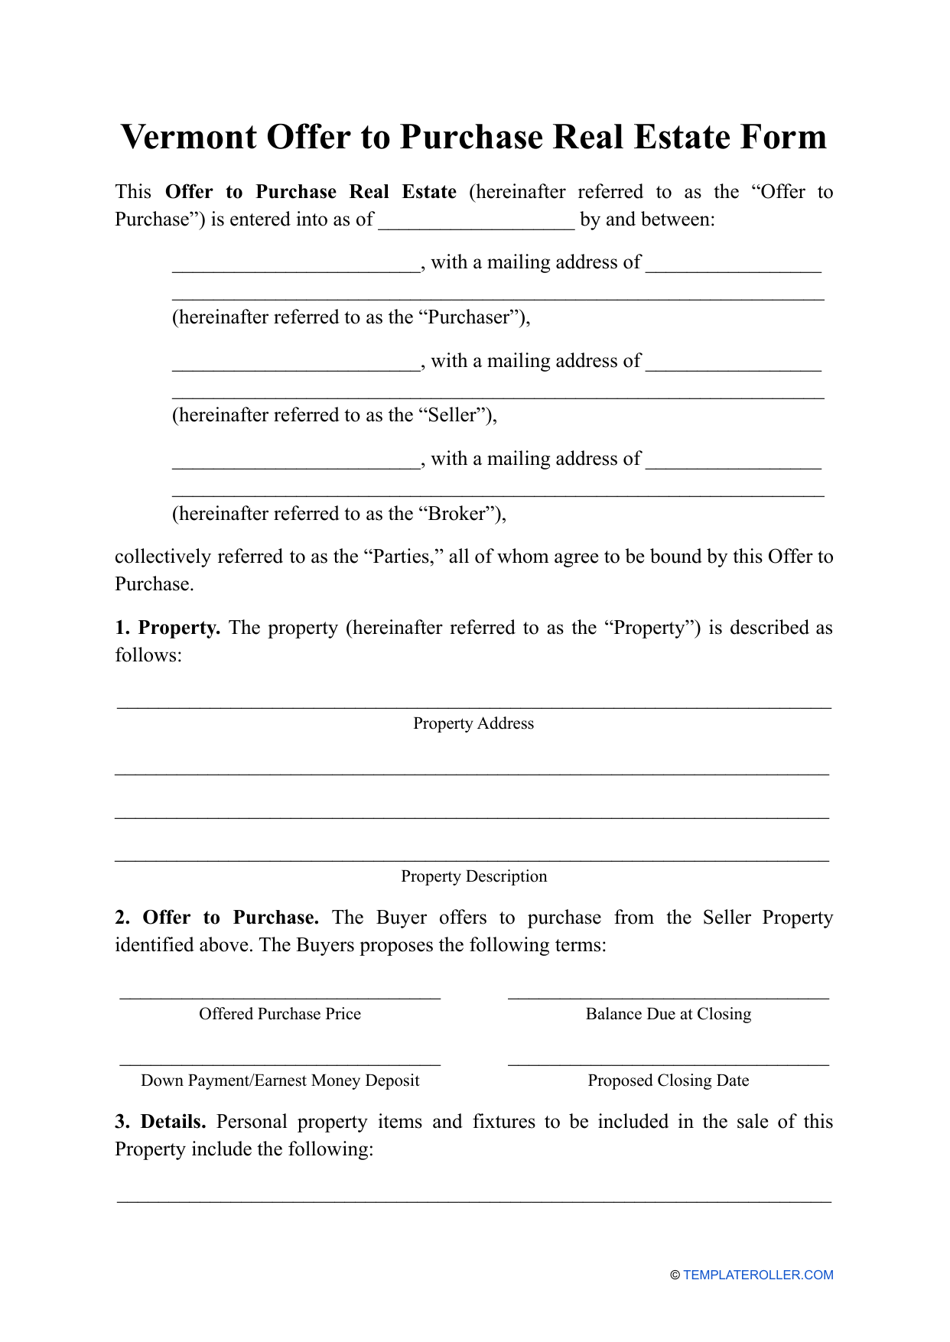 Offer to Purchase Real Estate Form - Vermont, Page 1